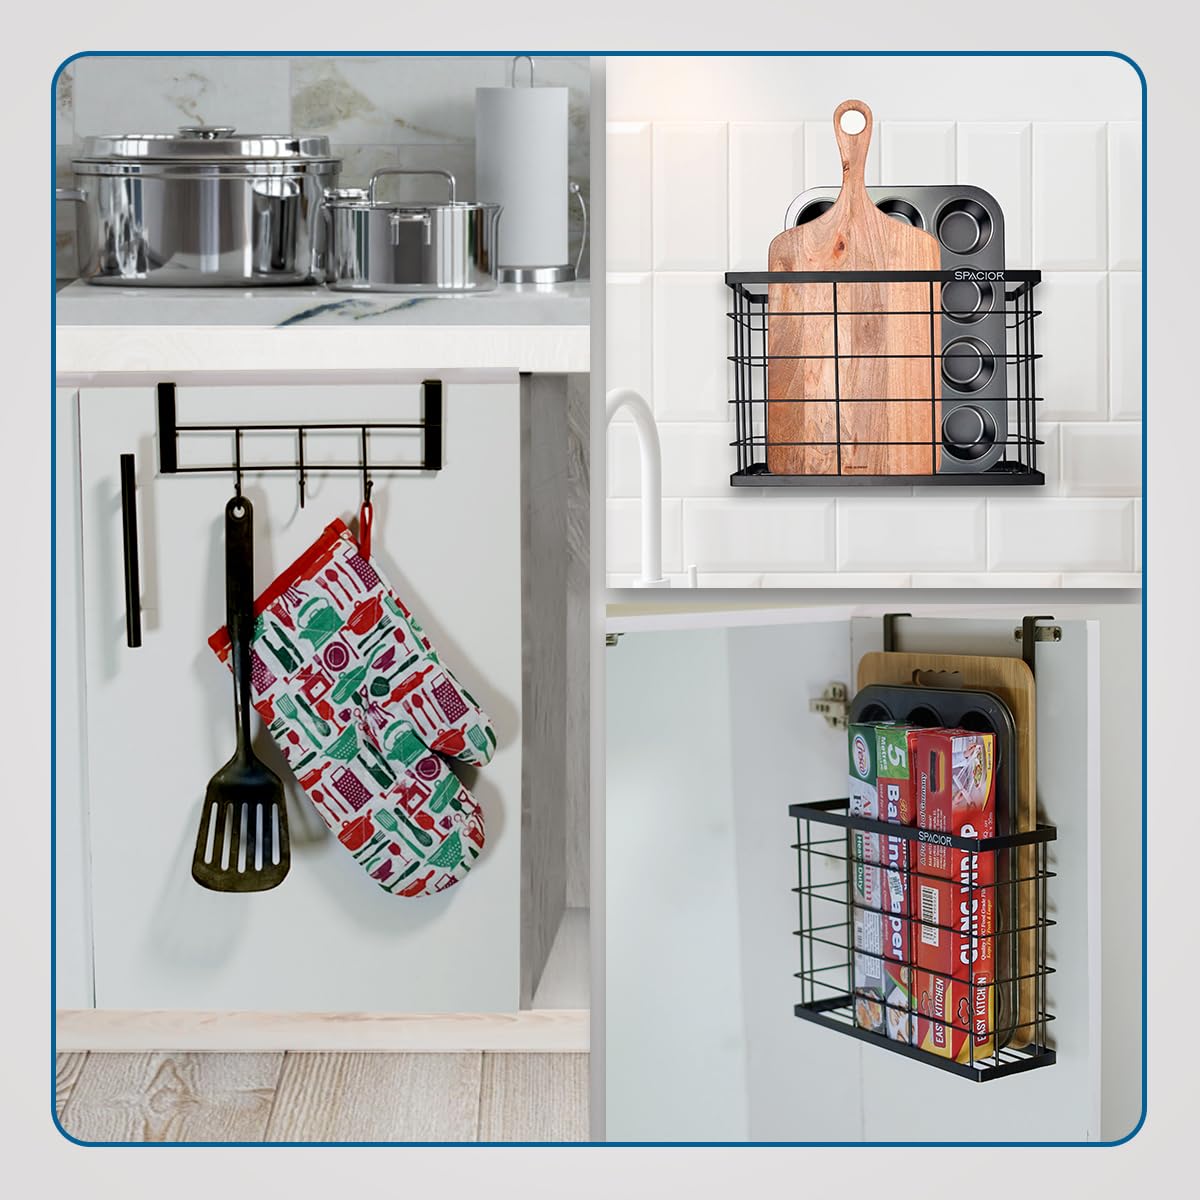 SPACIOR 2 Pack Over the Cabinet Door Organizer Holder with Multipurpose Hooks. Kitchen Cabinet Door Organizer and Storage for Baking Sheets, Foil Wraps&Cleaning Supplies - Hanging Cutting Board Holder